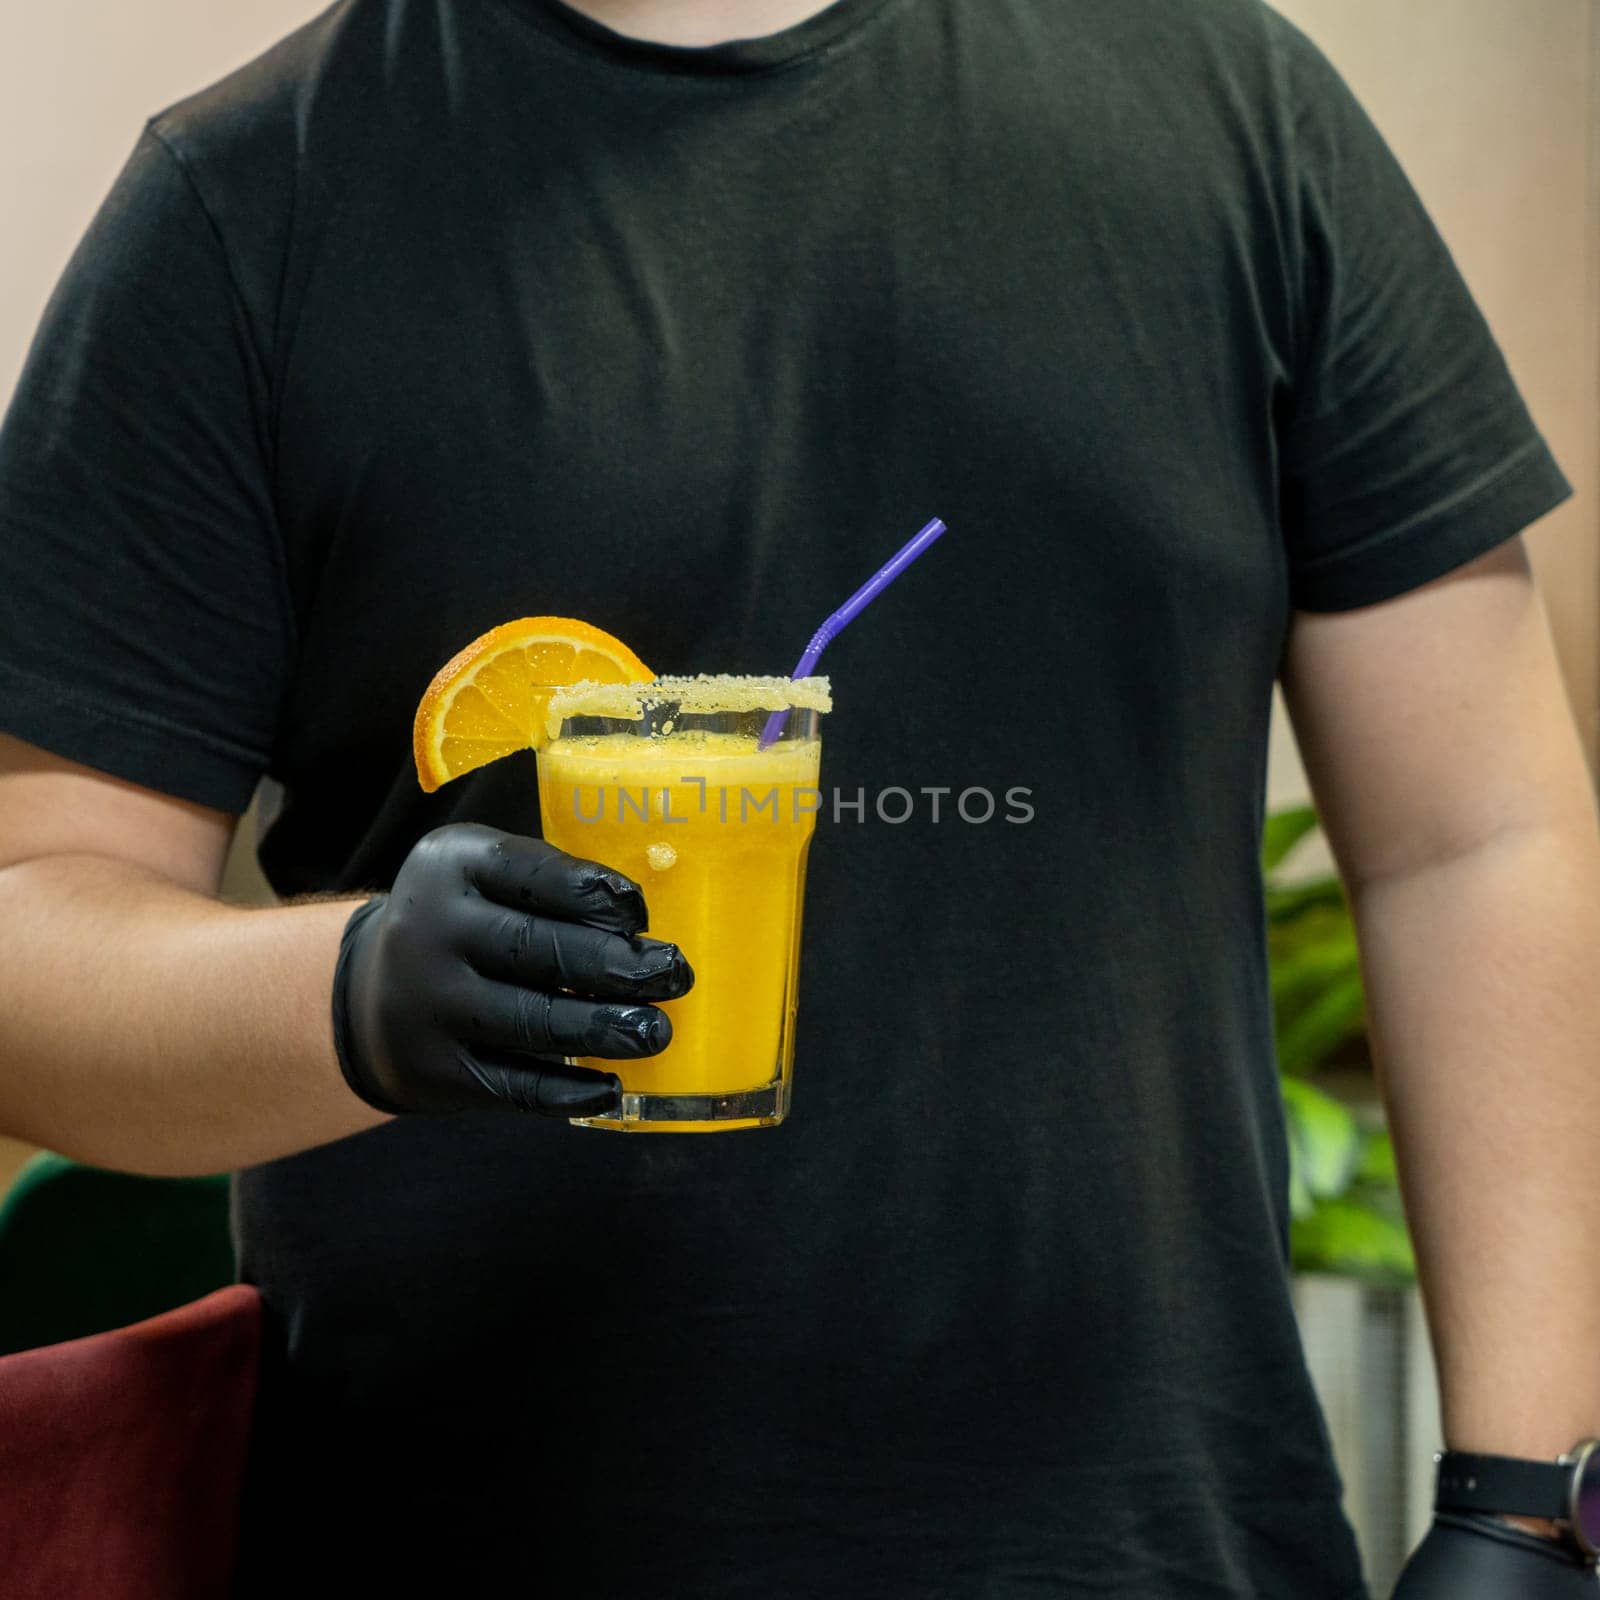 A vertical closeup of the bartender holding a glass of orange drink in the sports complex